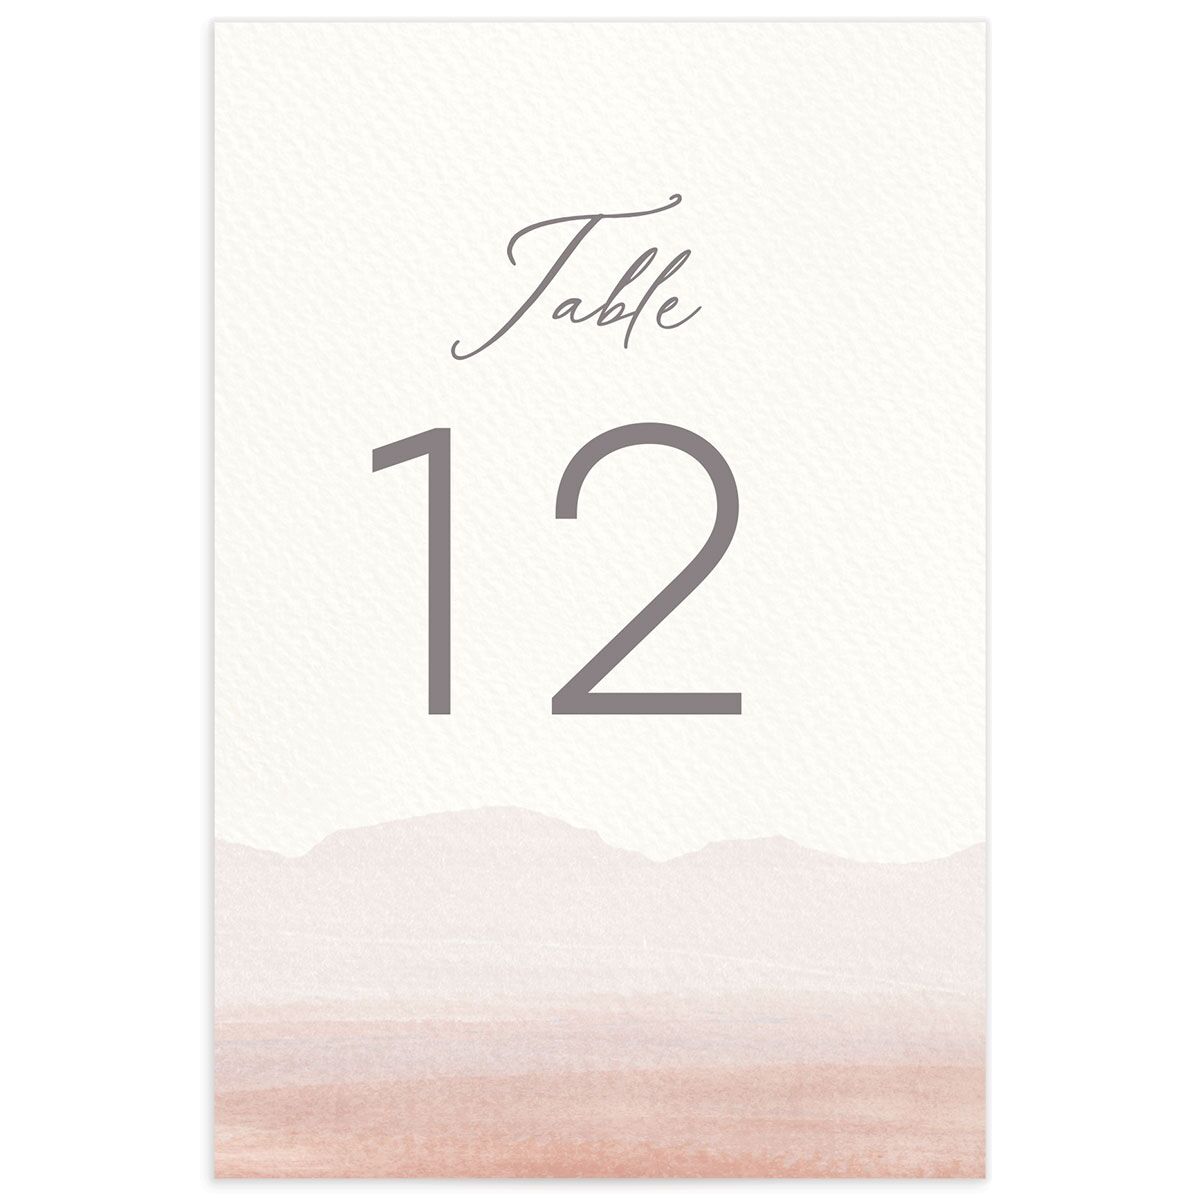 Painted Landscape Table Numbers back in Rose Pink